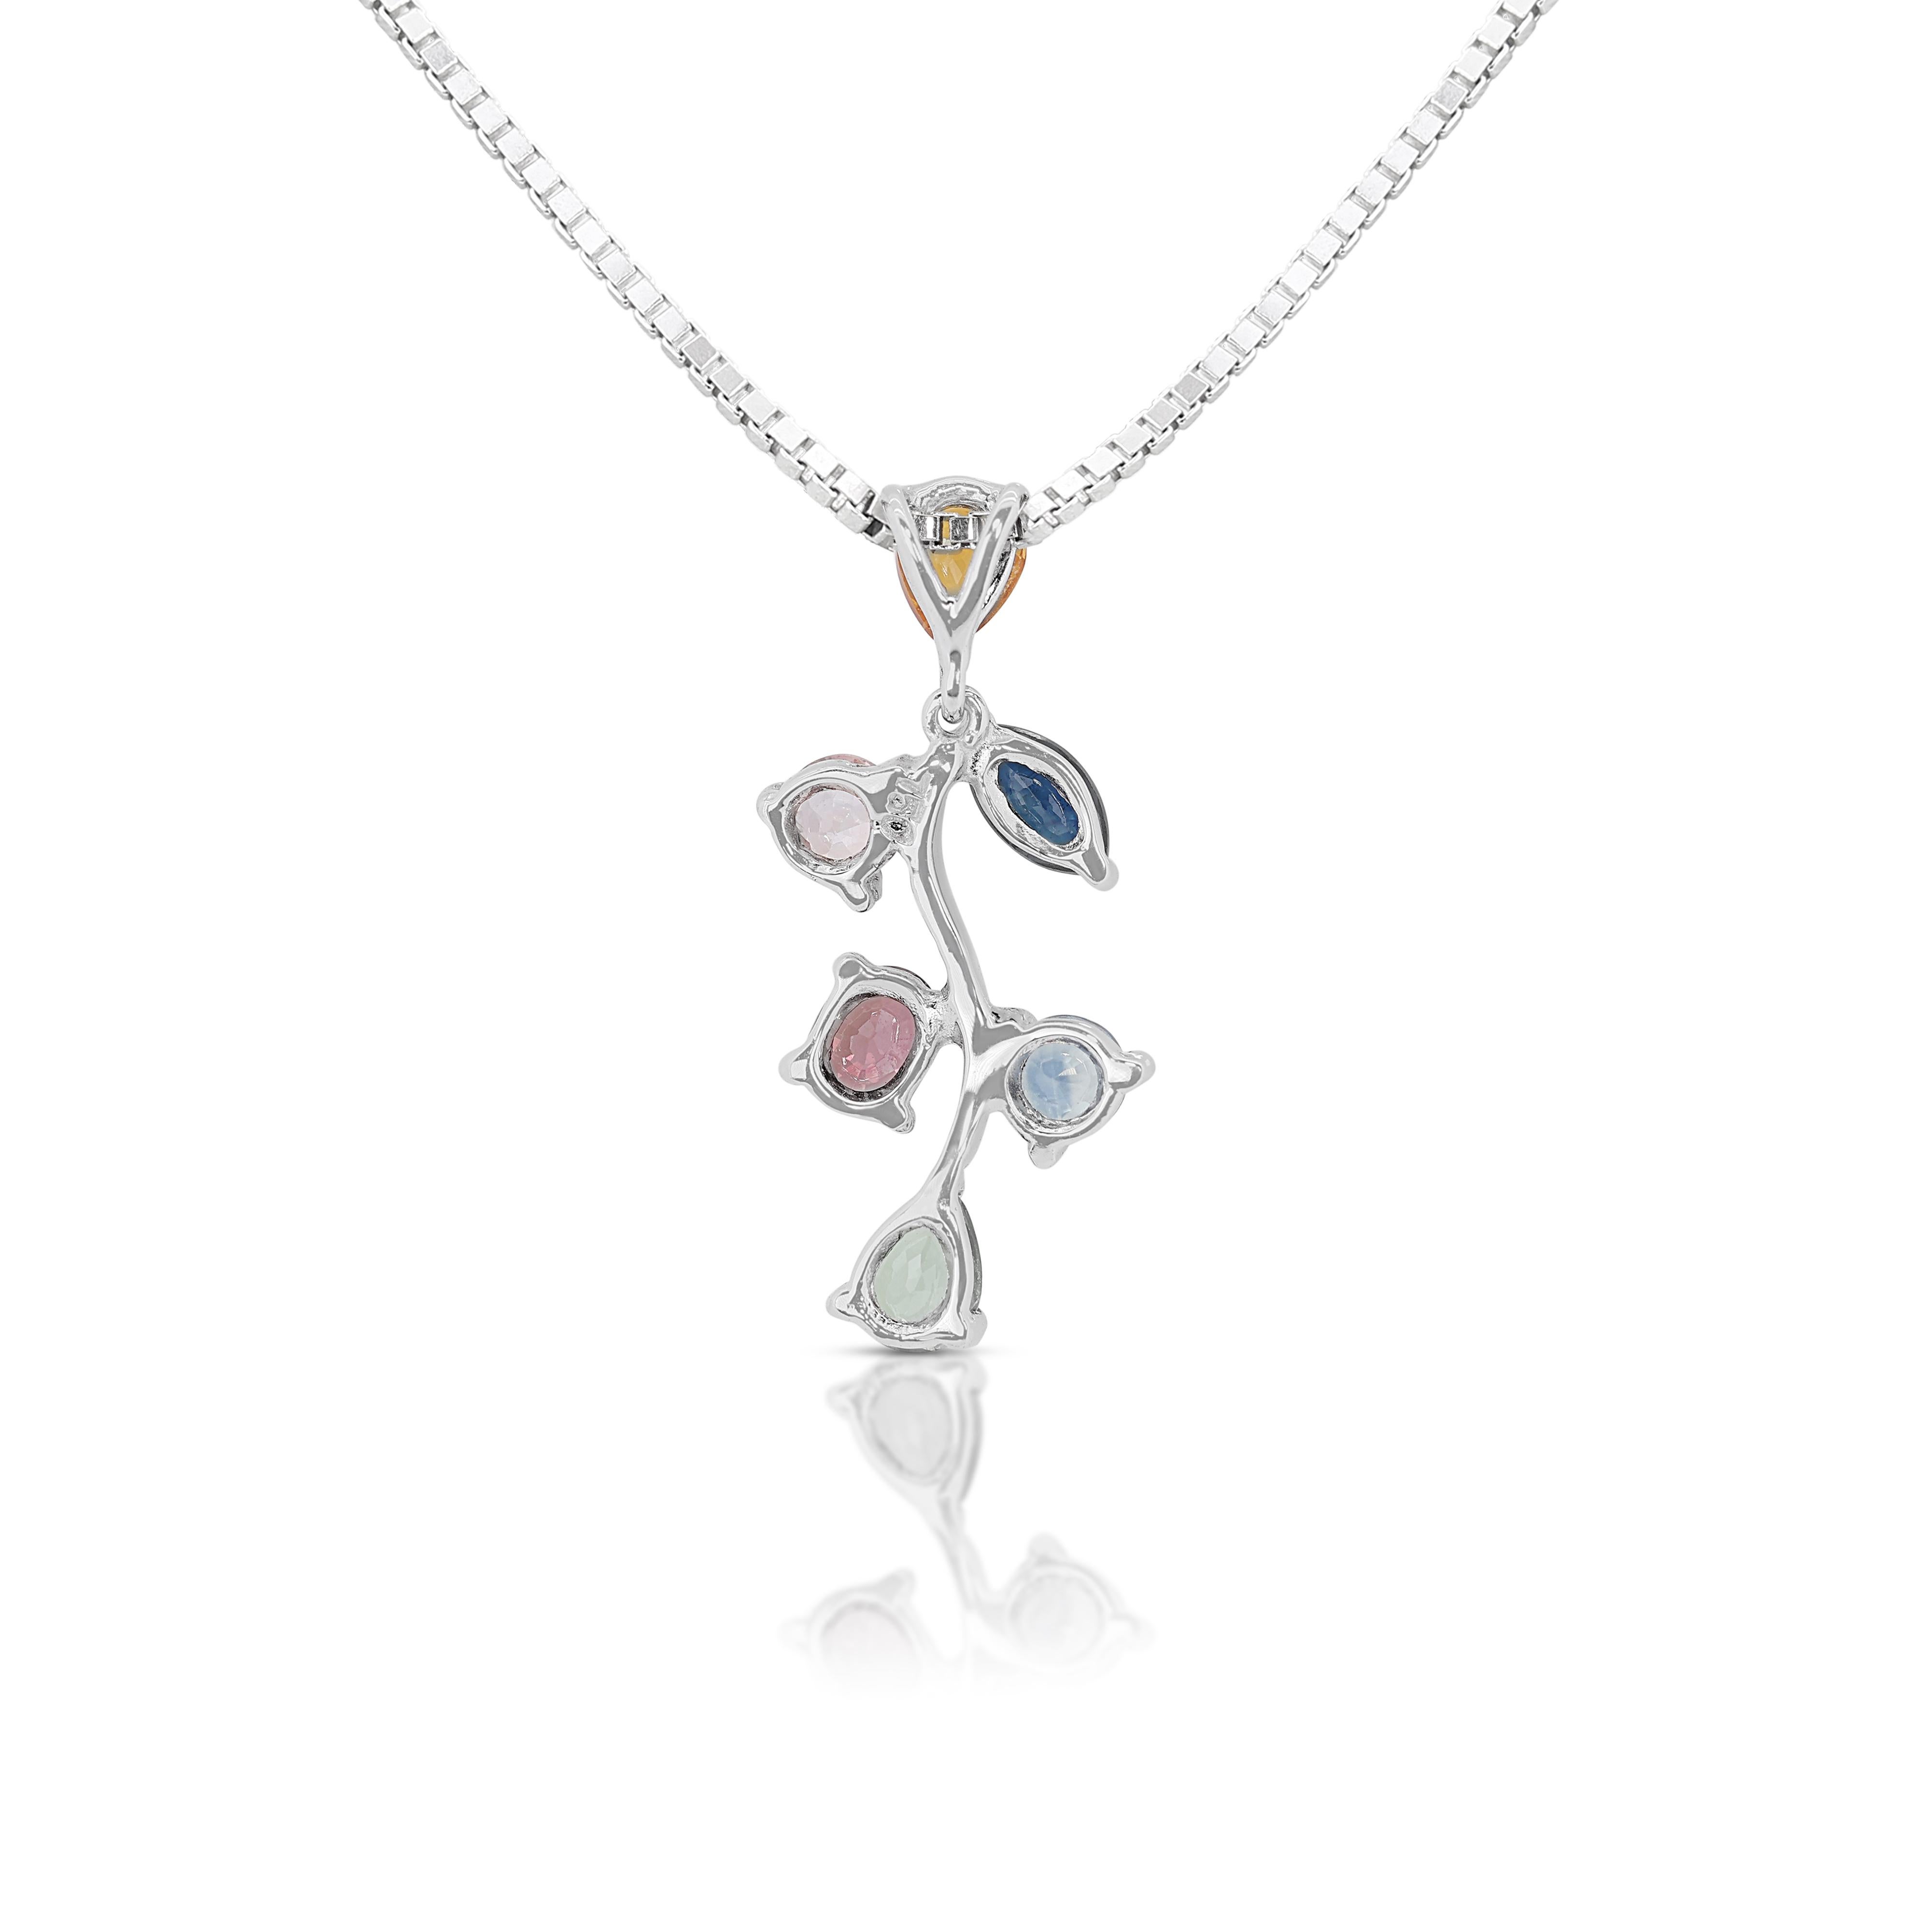 Mixed Cut Captivating 0.70ct Multi-Colored Sapphires Pendant - (Chain Not Included) For Sale